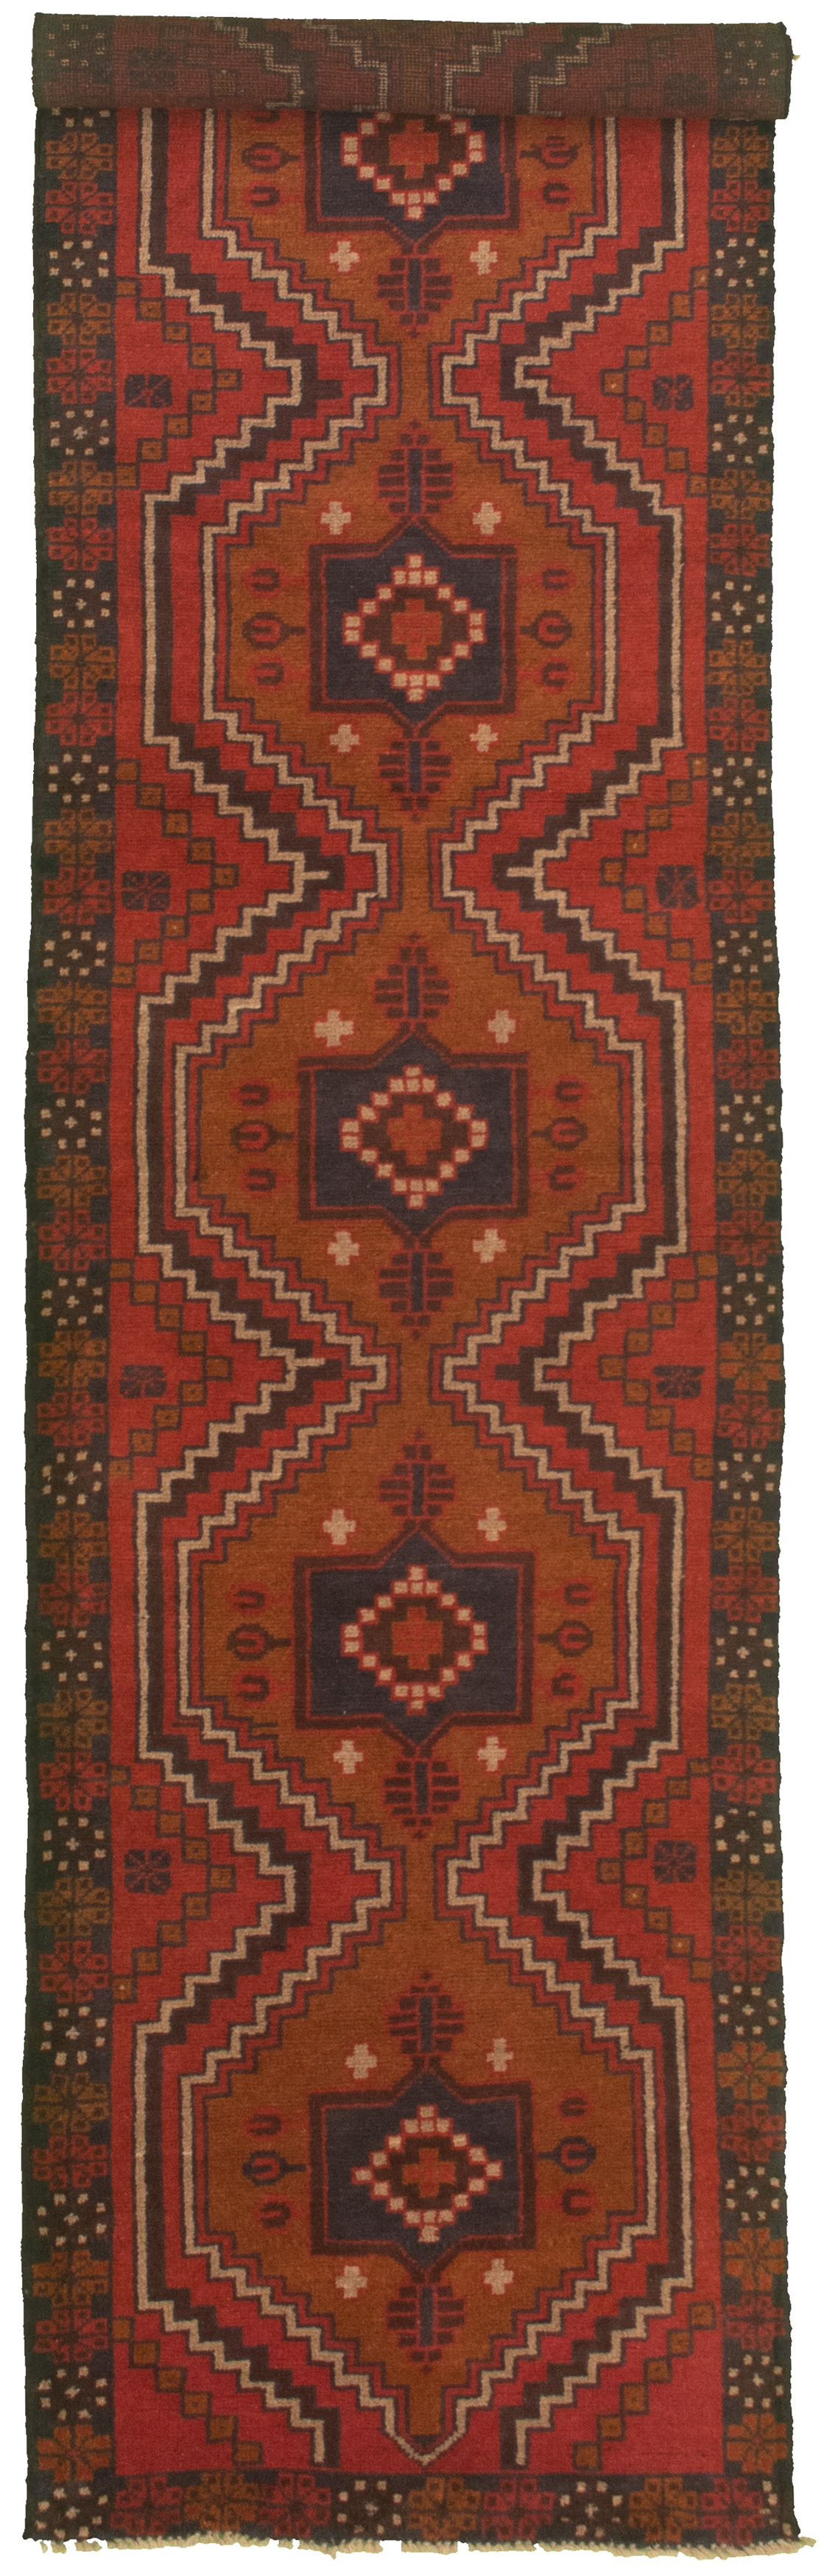 Hand-knotted Baluch Red Wool Rug 2'8" x 12'9" Size: 2'8" x 12'9"  